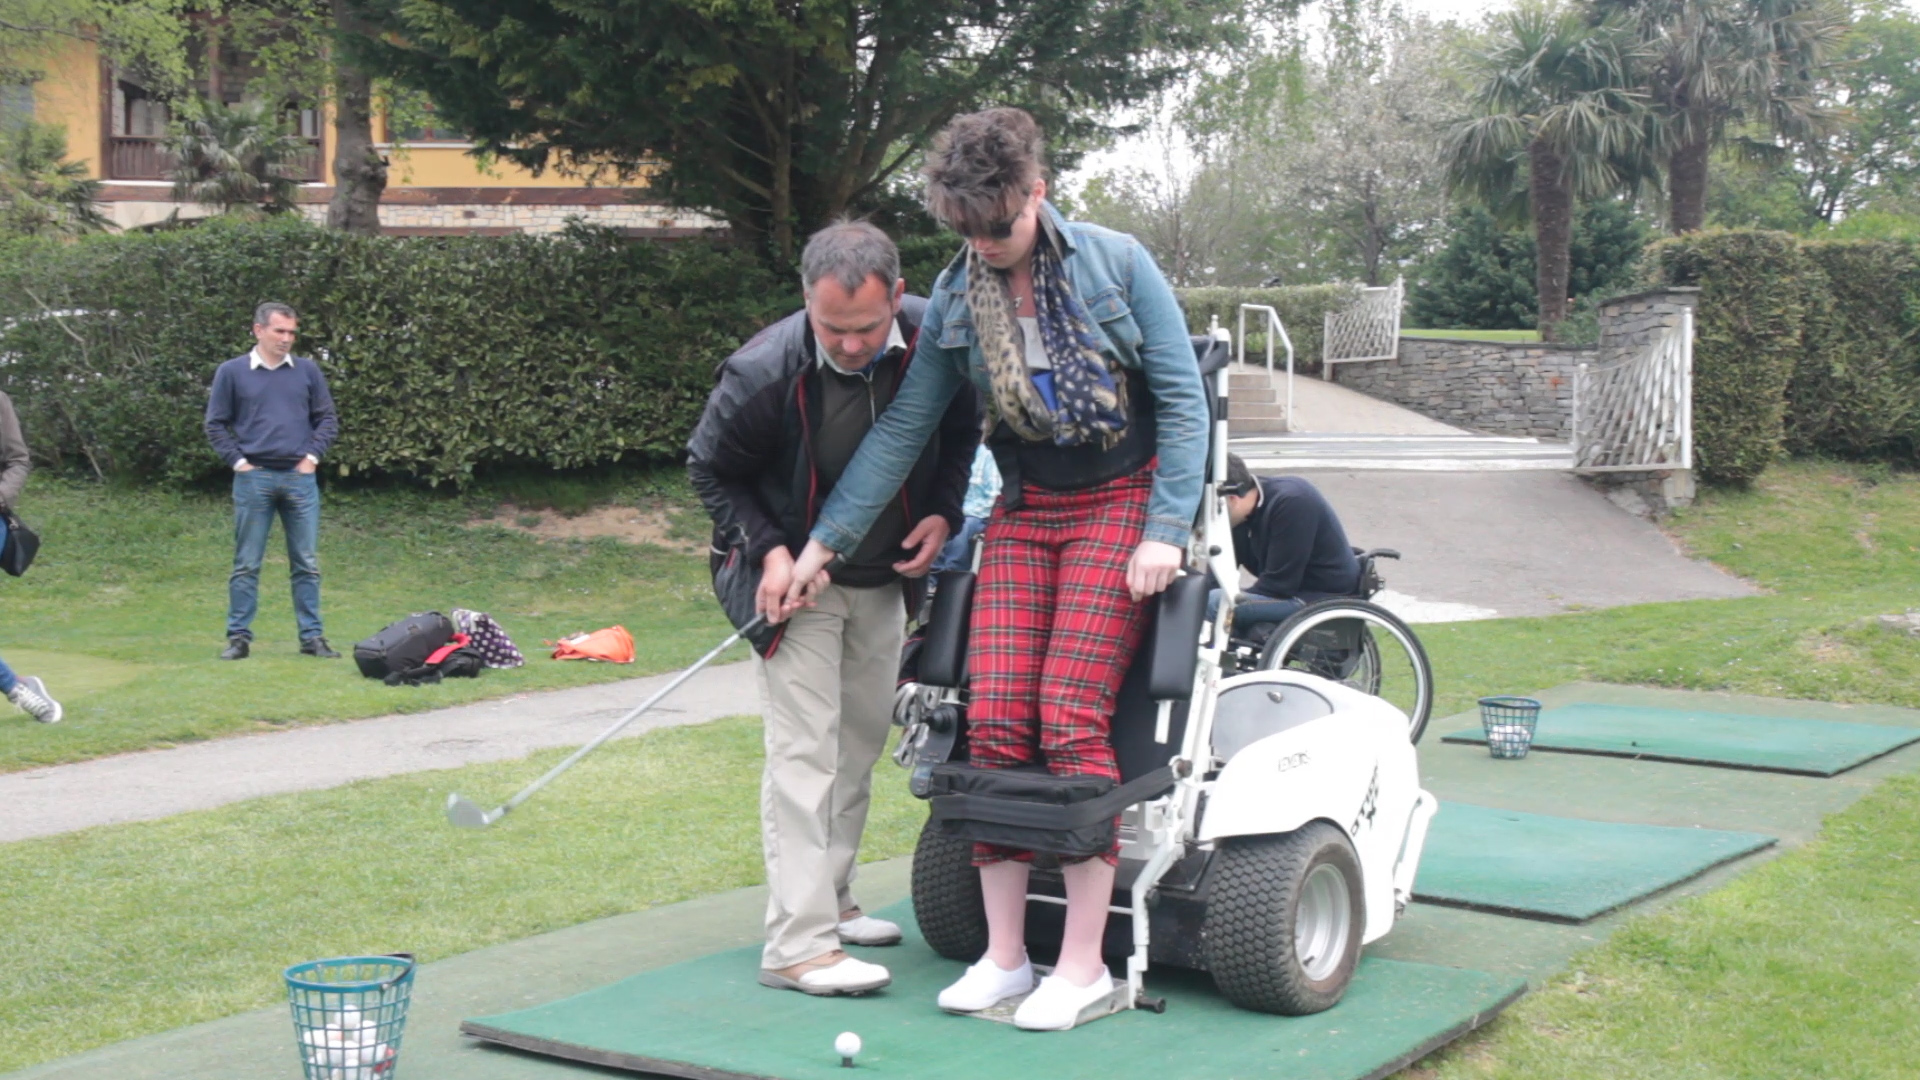 Here's Kathanna from Disabled Access Holidays demonstrating her skills!